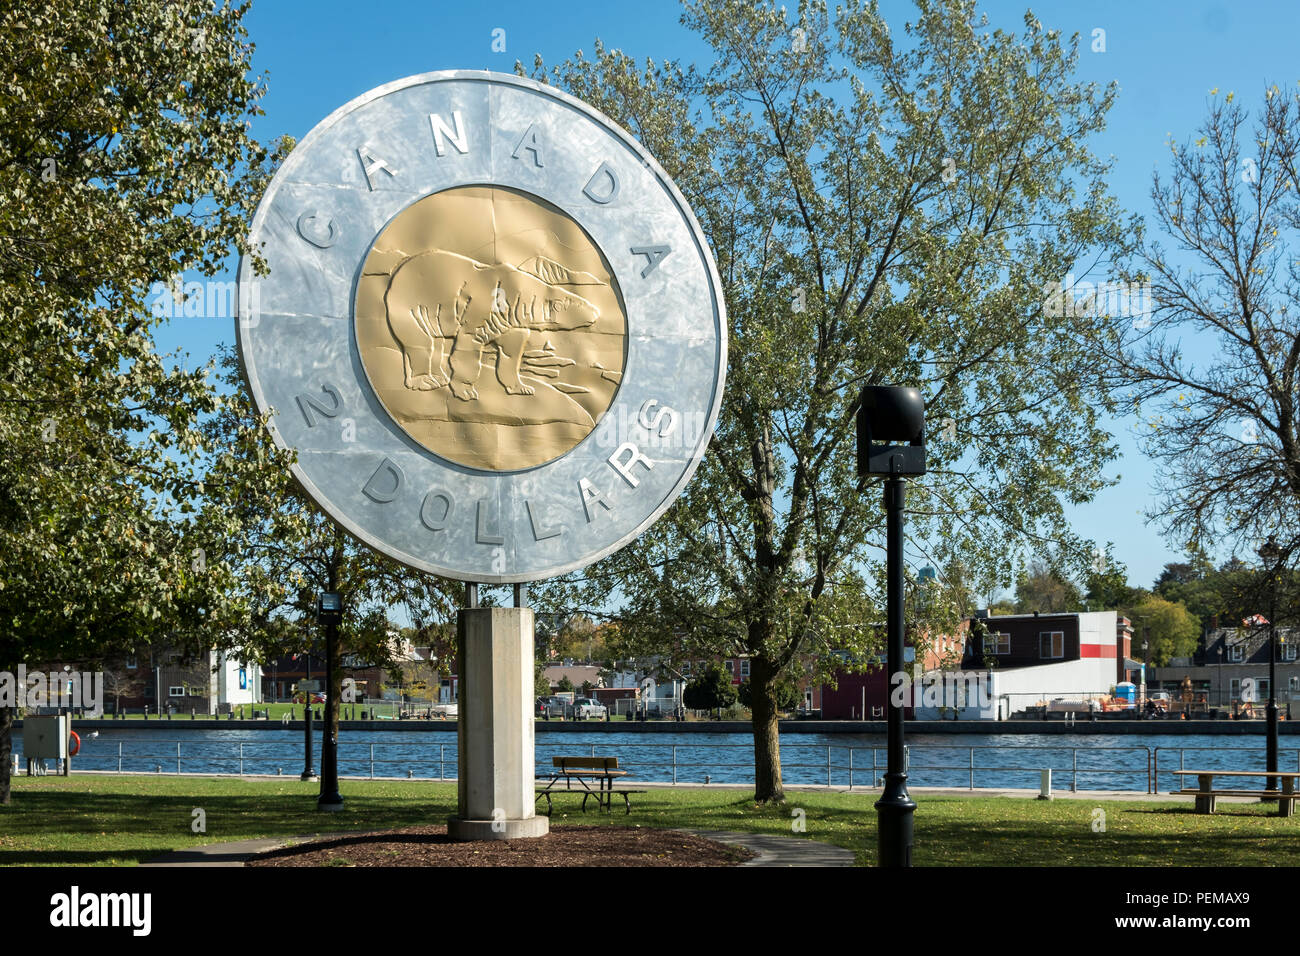 The giant Canadian Two dollar coin or toonie can be found in Old Mill Park in campbell ford Ontario Canada. Stock Photo